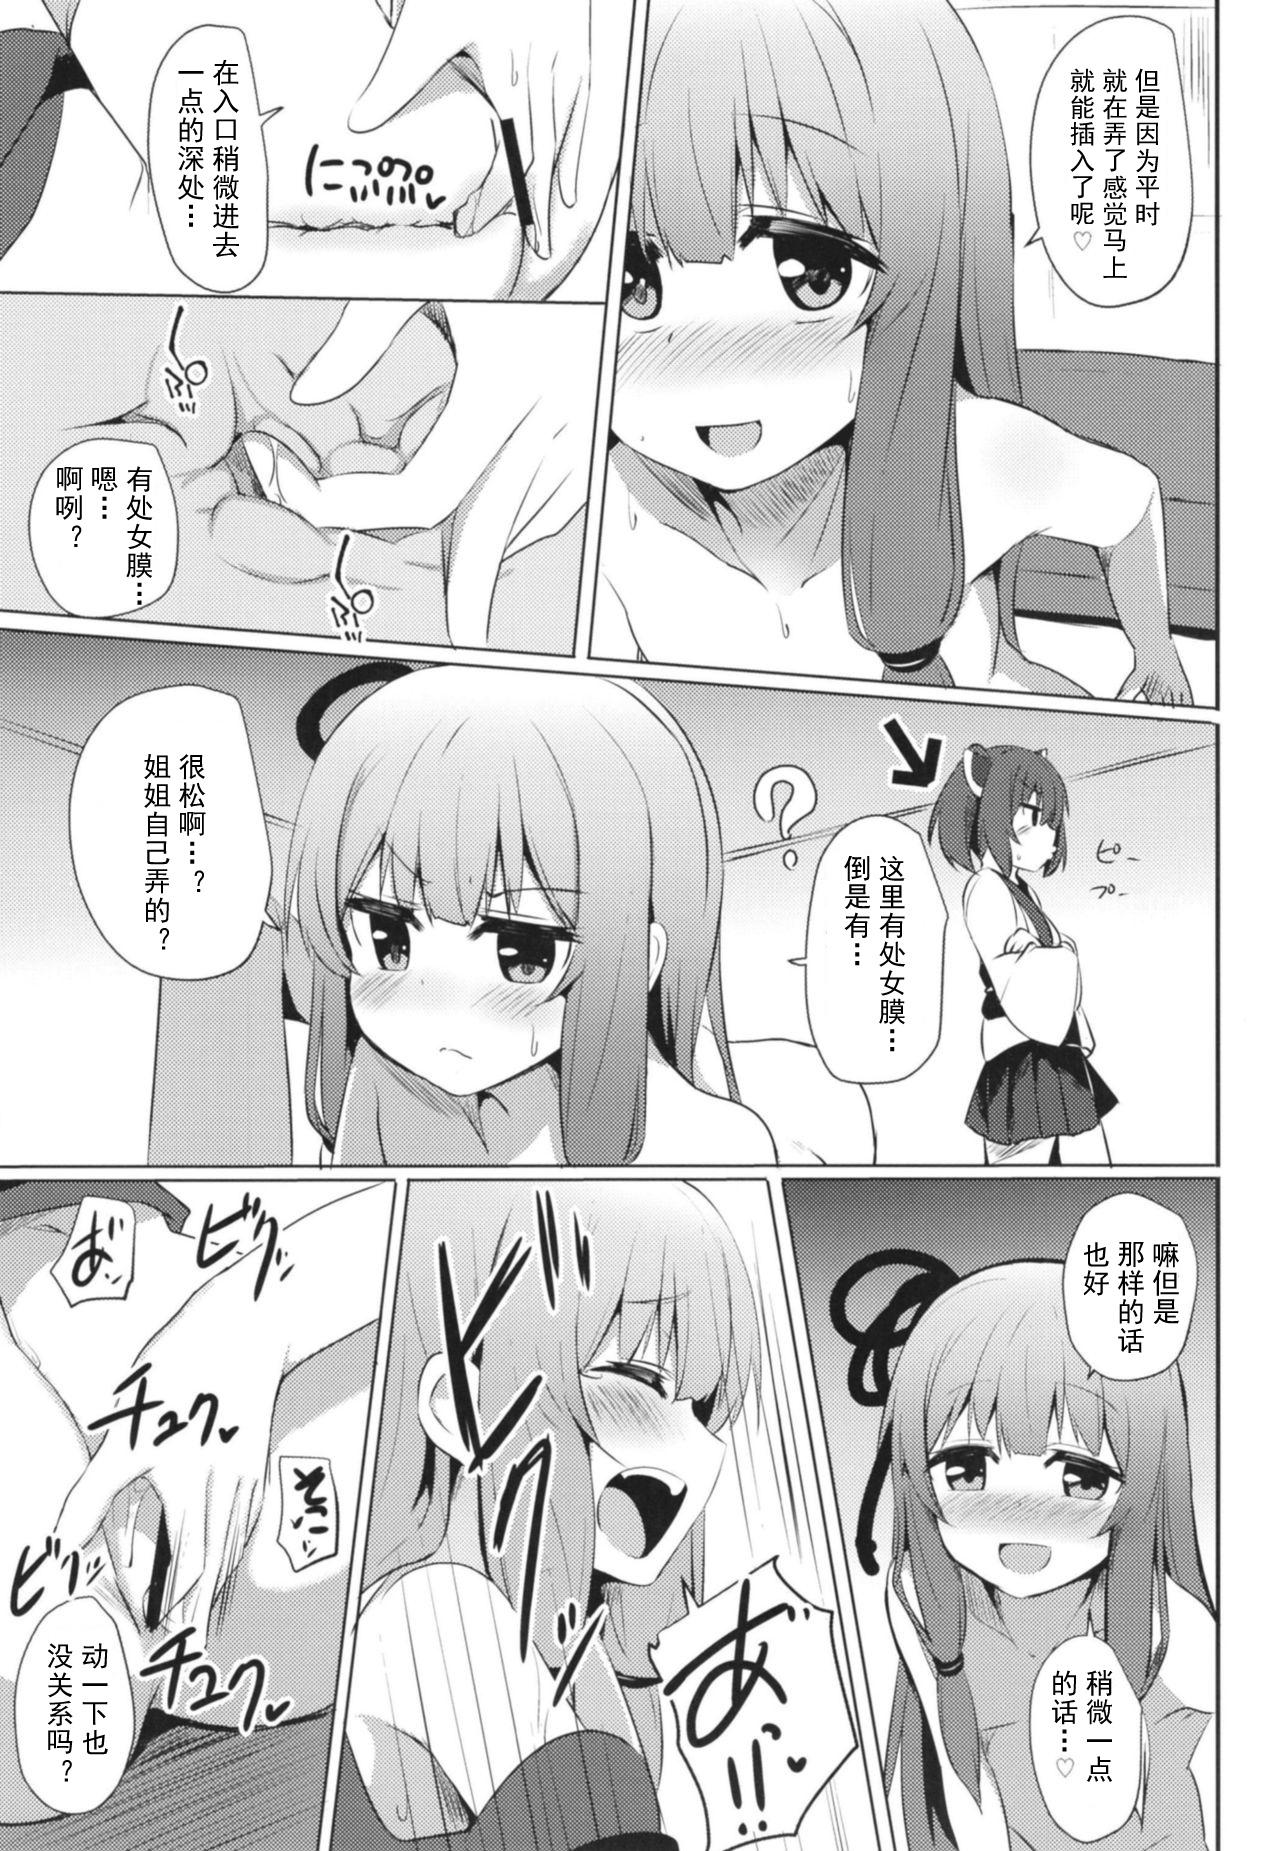 Blackcocks [Milk Pudding (Jamcy)] Akane-chan Challenge! 4-kaime (VOICEROID) [Chinese] [古早个人汉化] [Digital] - Voiceroid Pain - Page 7